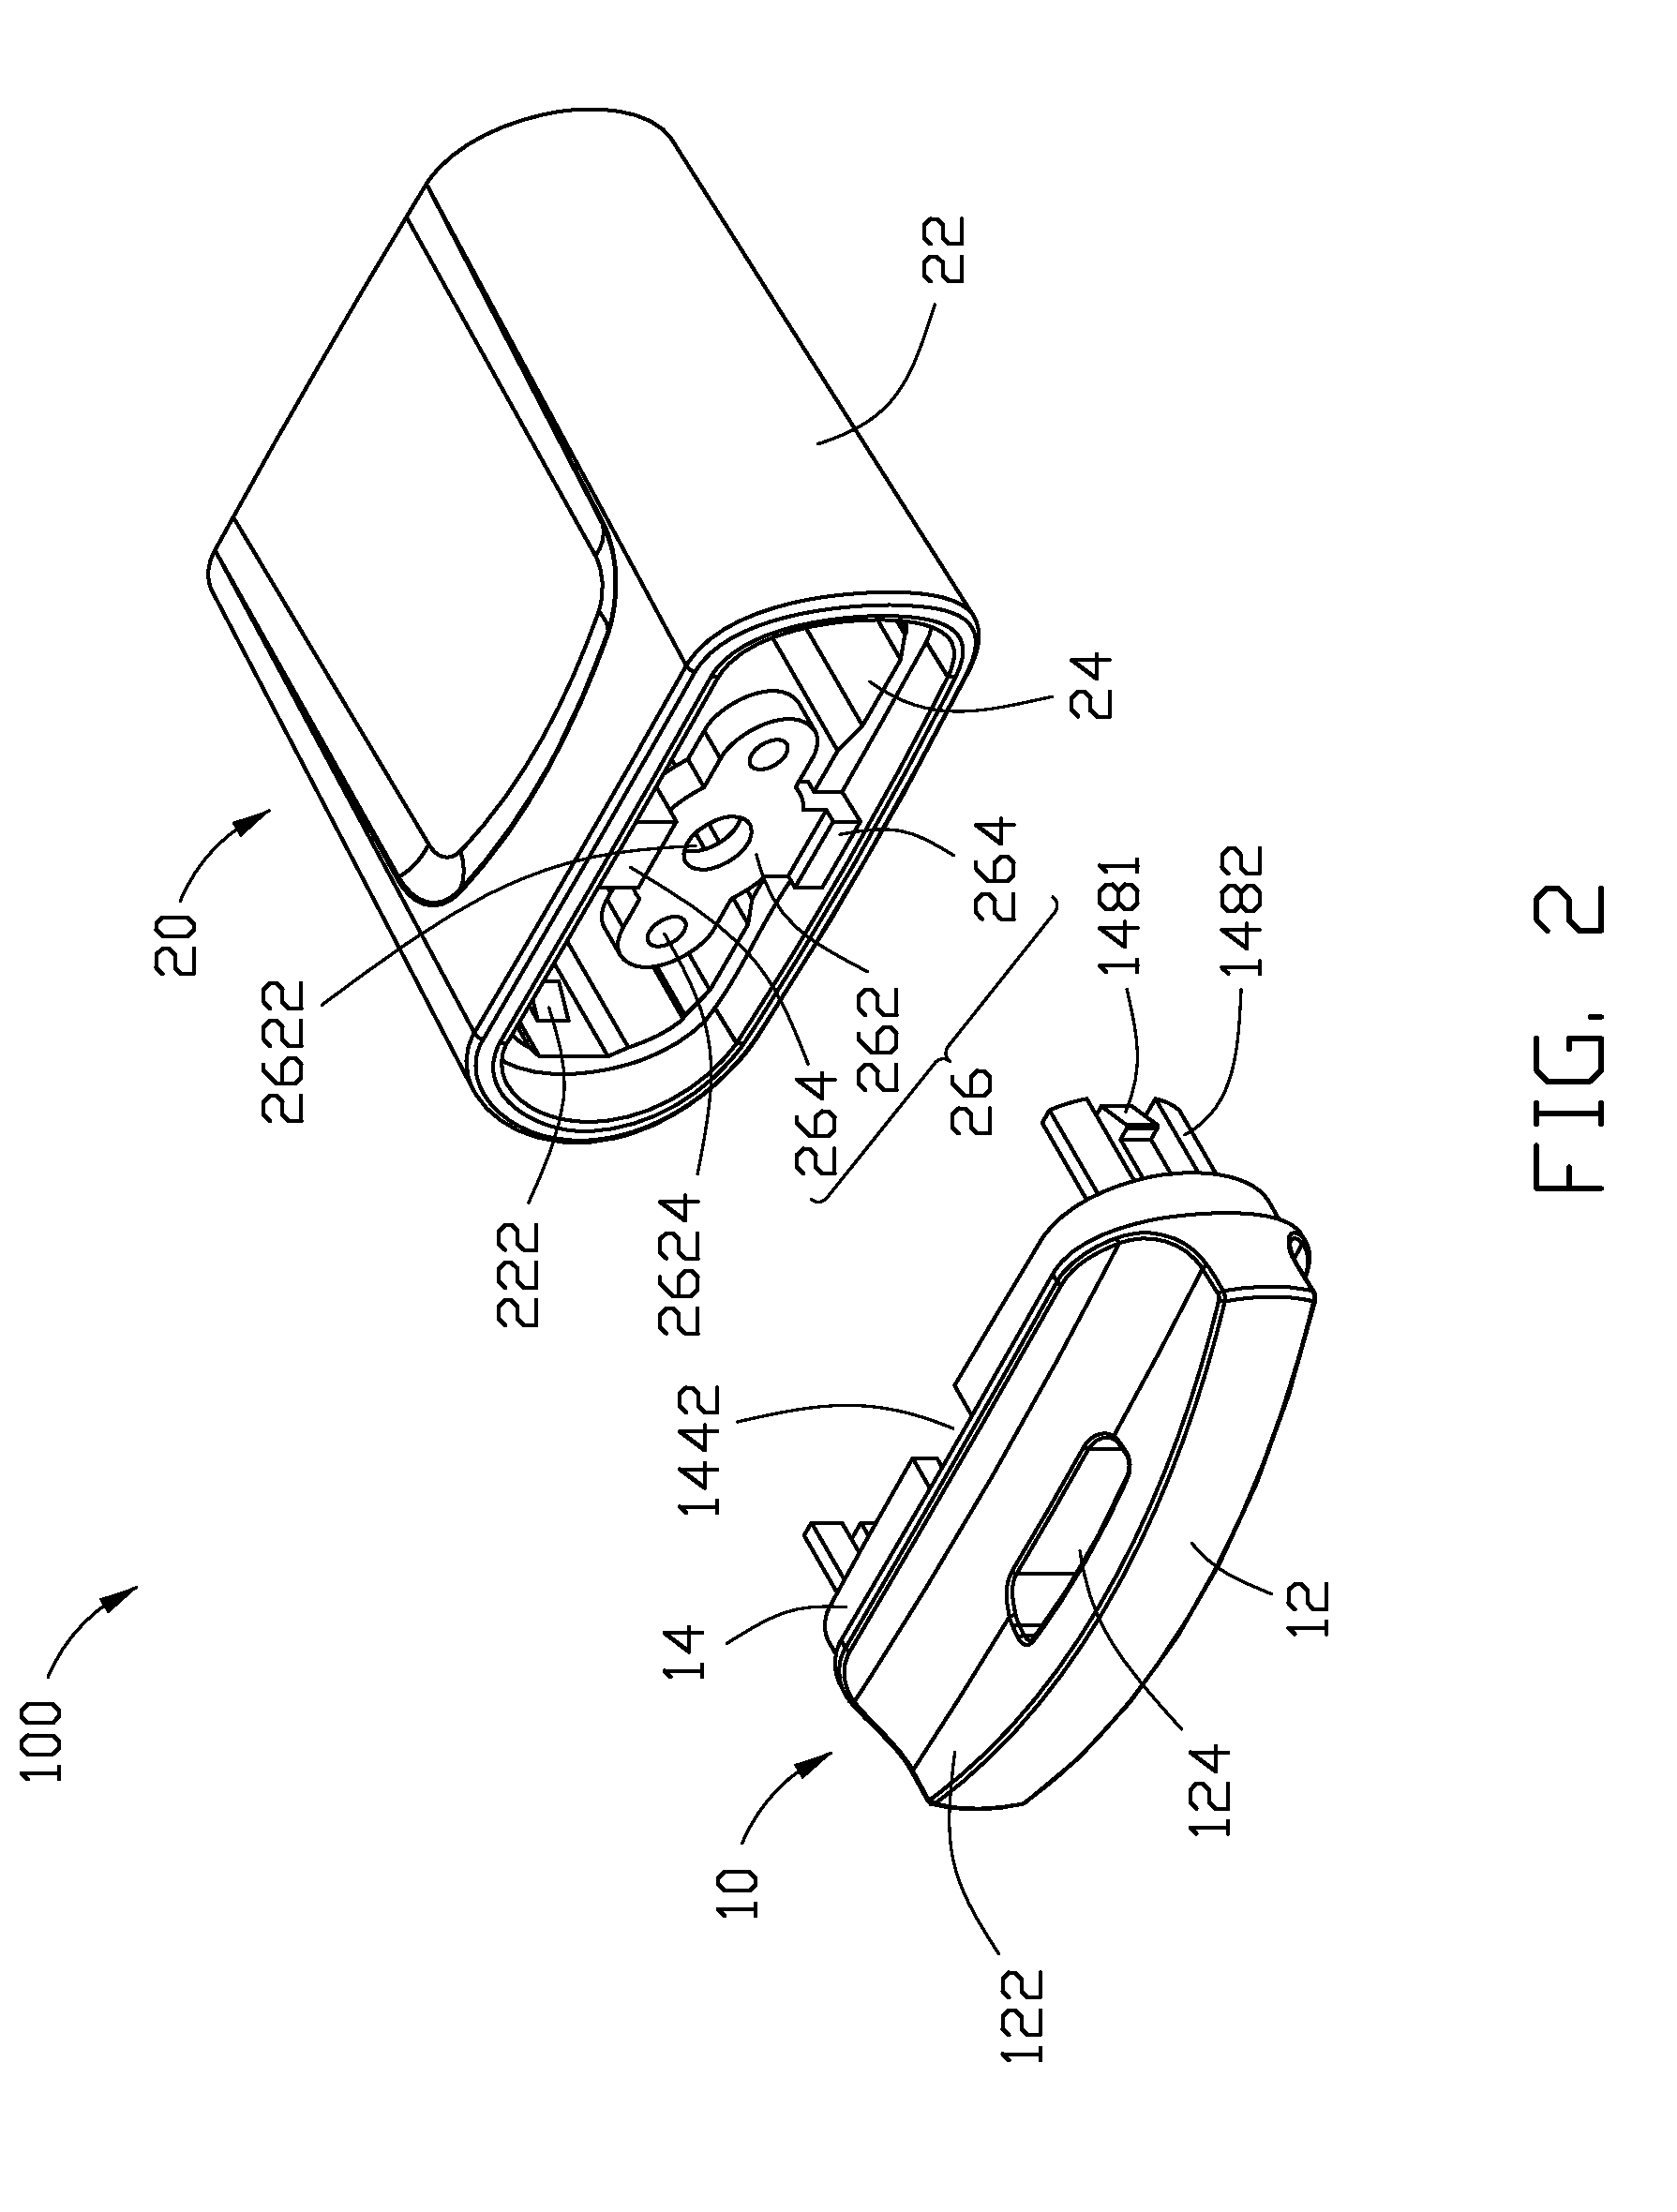 Protective cover mechanism